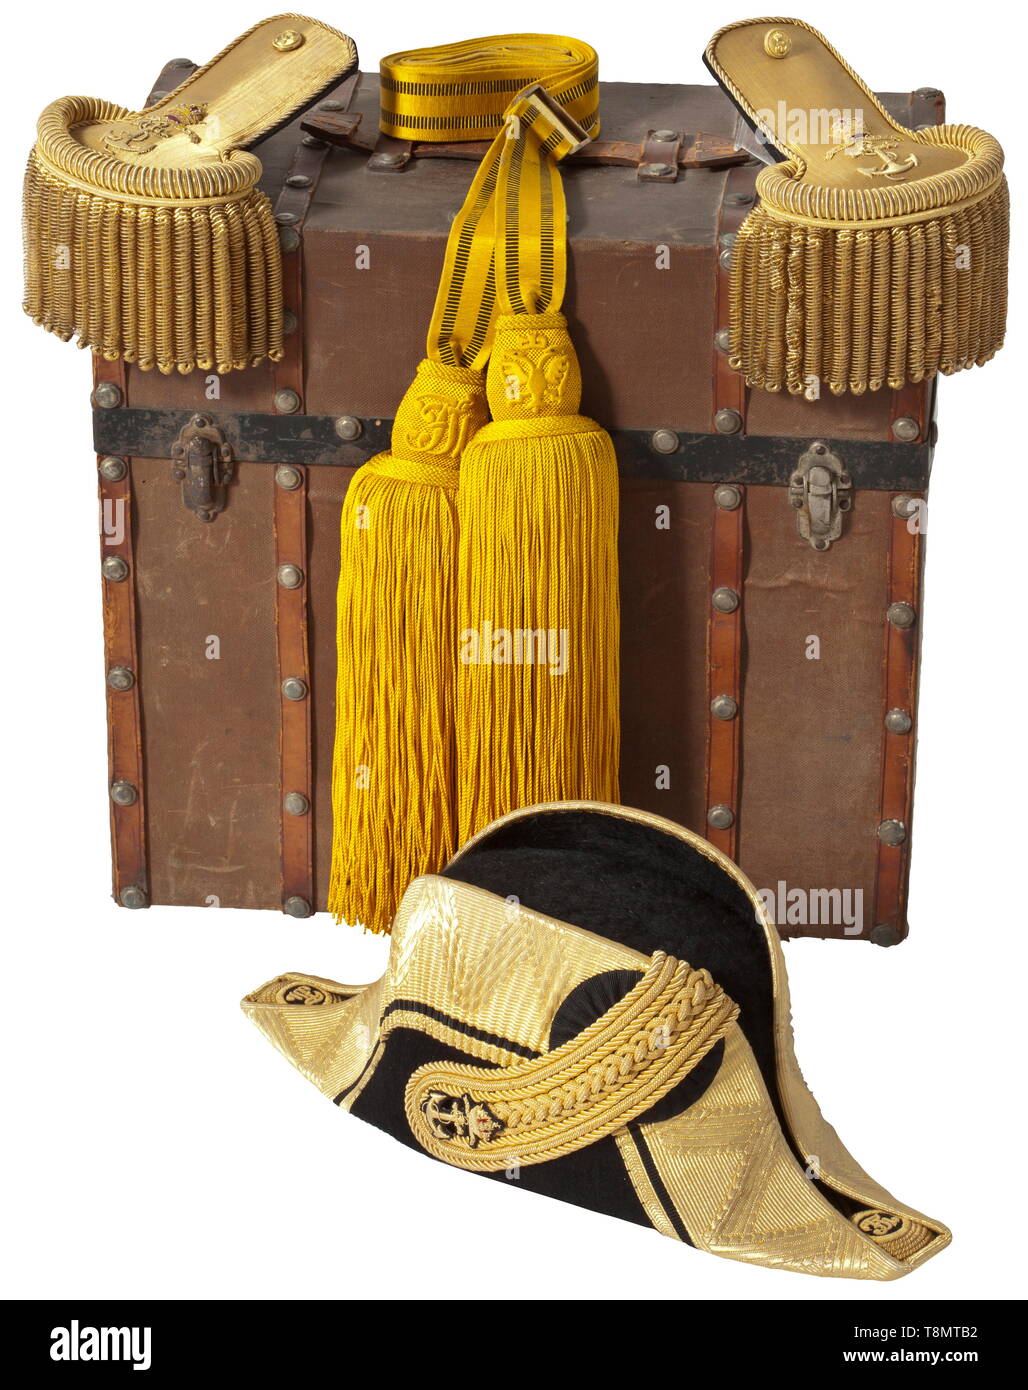 A bicorn and epaulettes of the Austro-Hungarian ship-of-the-line lieutenant Karl Novoszad in original case Bicorn of black silk mohair trimmed in wide gold braid, gold-braided loop with embroidered crowned anchor. Both hat ends with gold roses bearing the initials 'FJI'. White silk lining featuring the maker's label (tr.) 'Franz Thill's Nephew His Majesty's Depot - Purveyor to the Imperial and Royal Court'. Excellent condition, the gold only minimally darkened. Also an associated pair of gold epaulettes with embroidered crowend anchor, anchor but, Additional-Rights-Clearance-Info-Not-Available Stock Photo